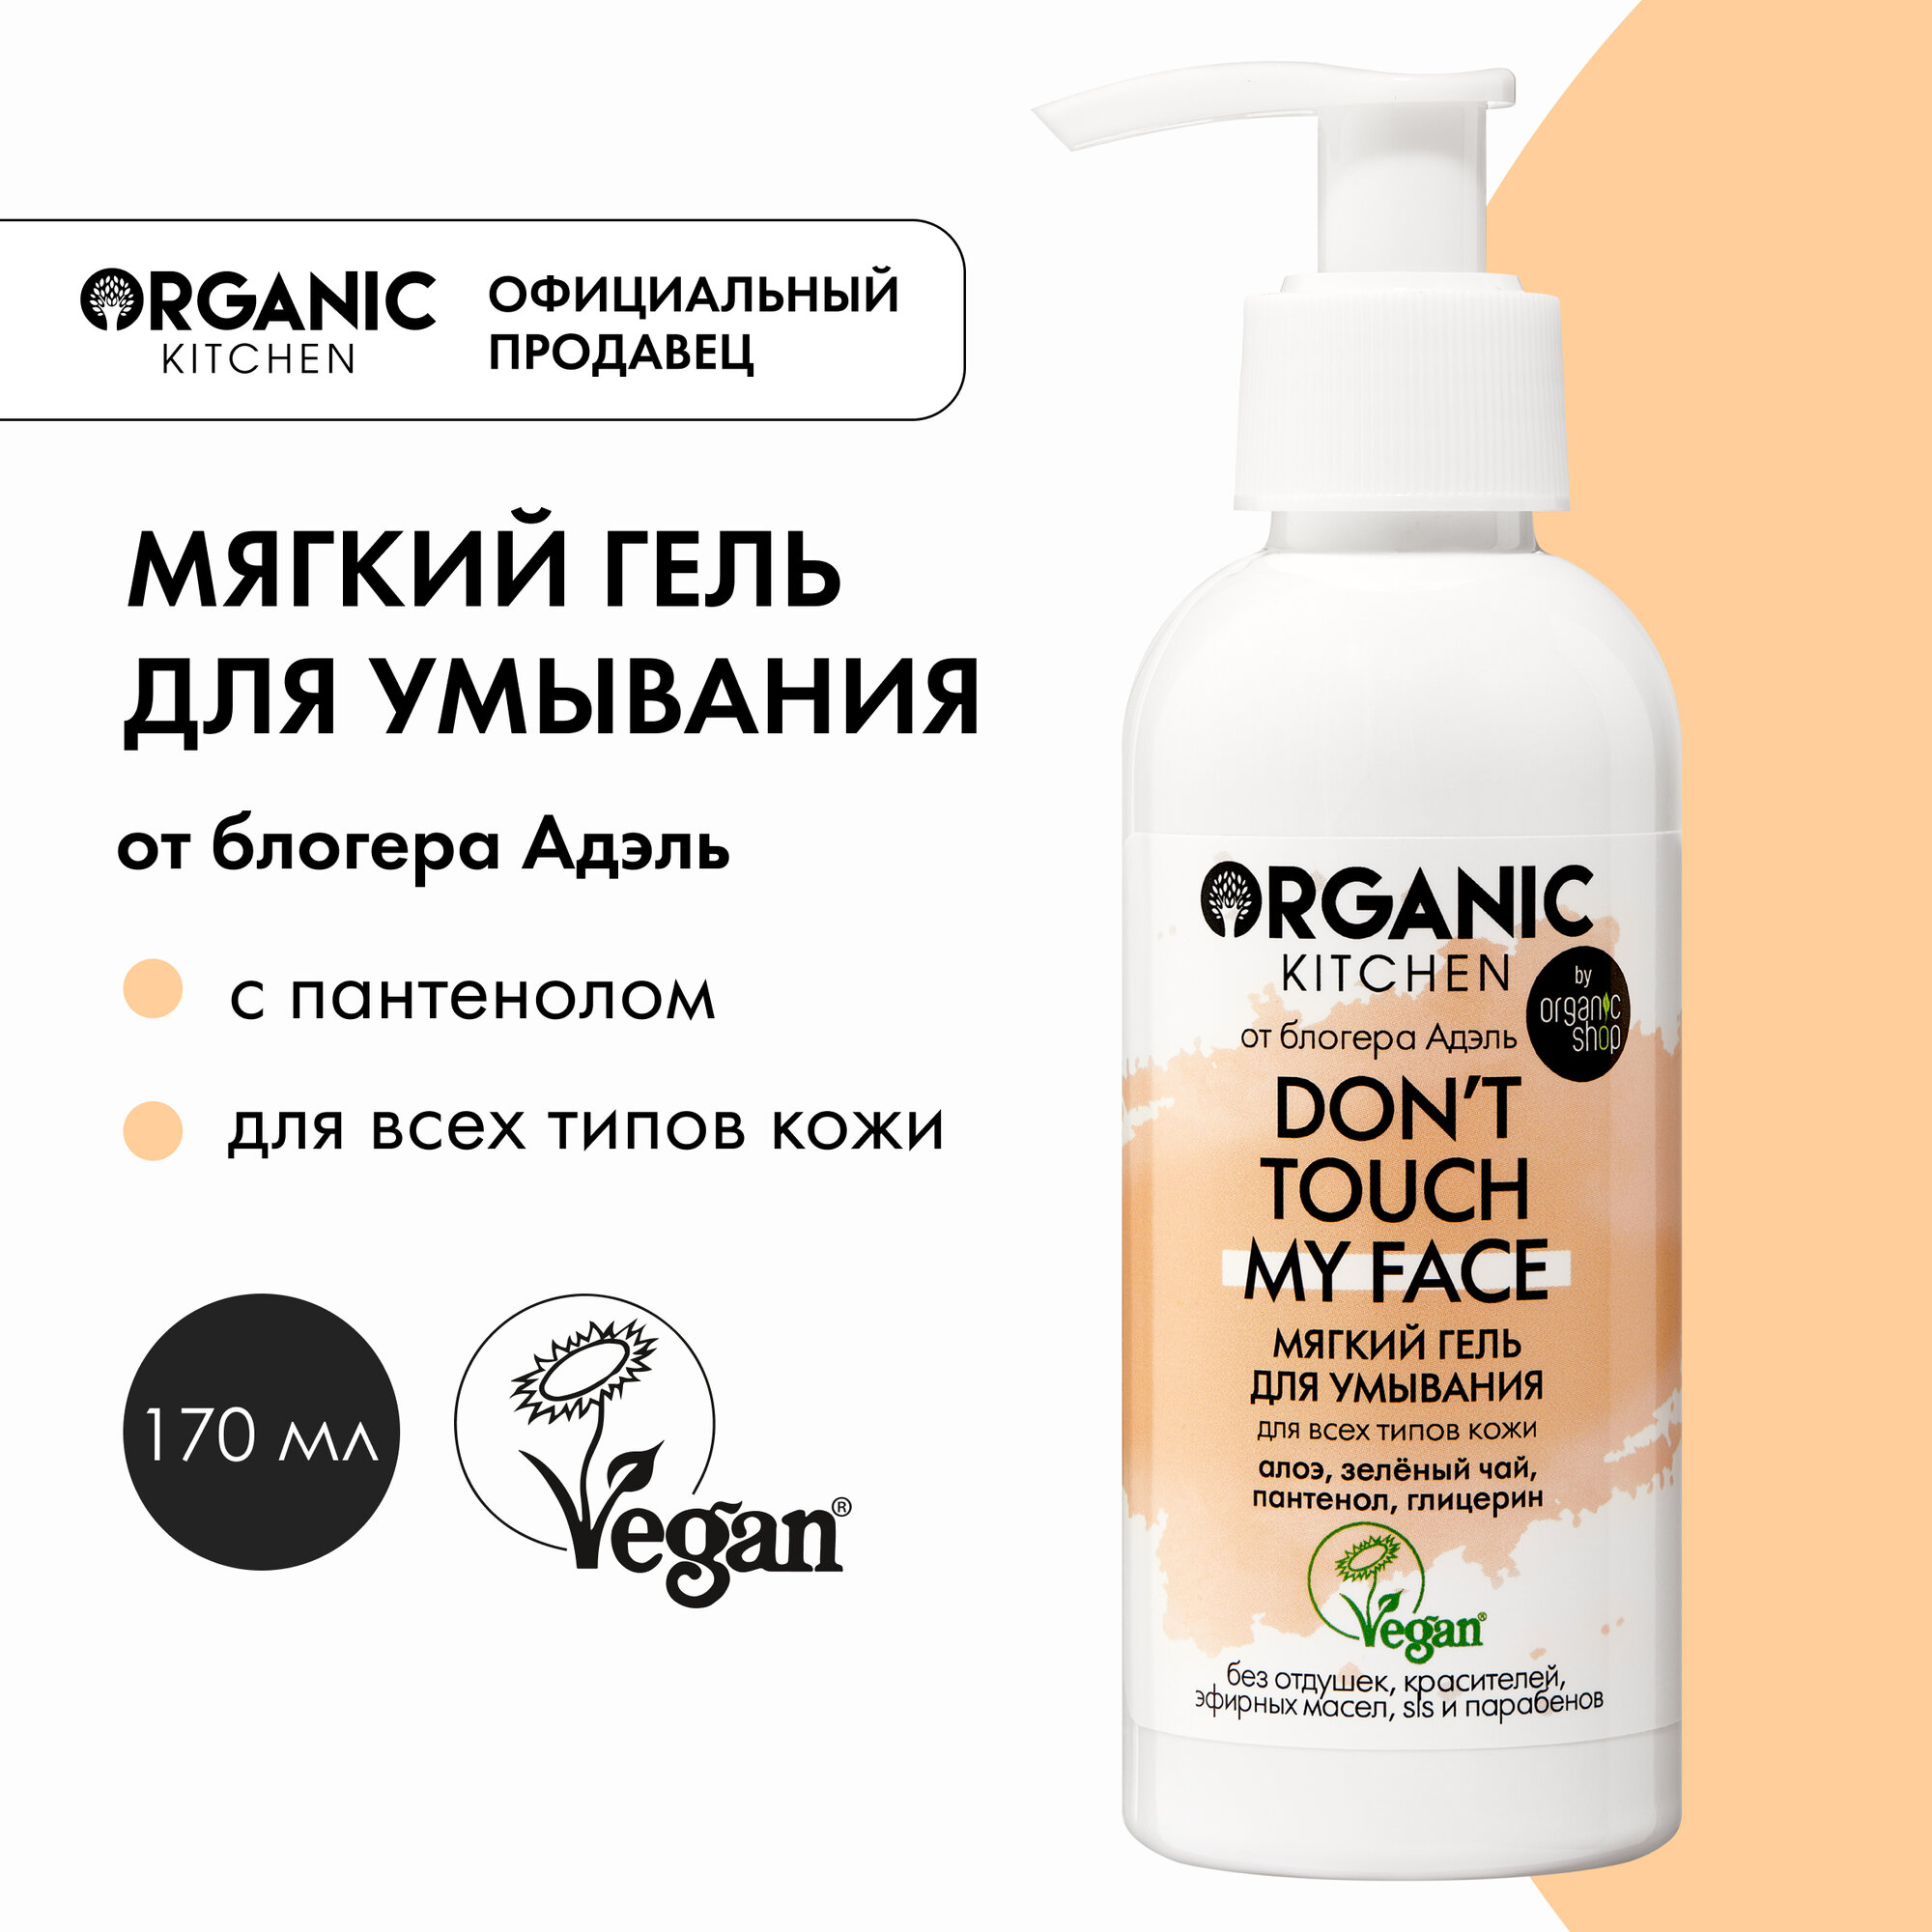     Organic Kitchen Bloggers   Don't touch my face, 170 